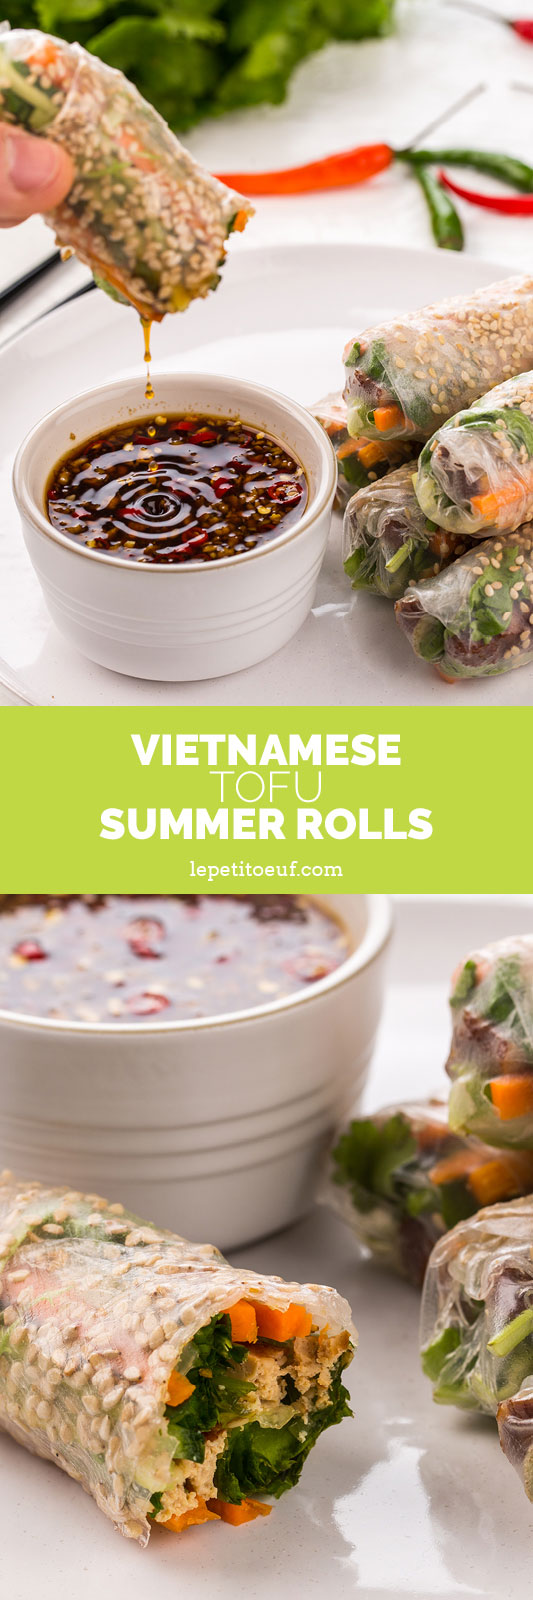 Vietnamese spring rolls with a vegetarian twist, featuring smoked tofu to make delightfully aromatic, crispy, crunchy tofu summer rolls which are vegetarian and vegan. You can make these in the kitchen to wow your guests or build them at the table so everyone can get their hands dirty.